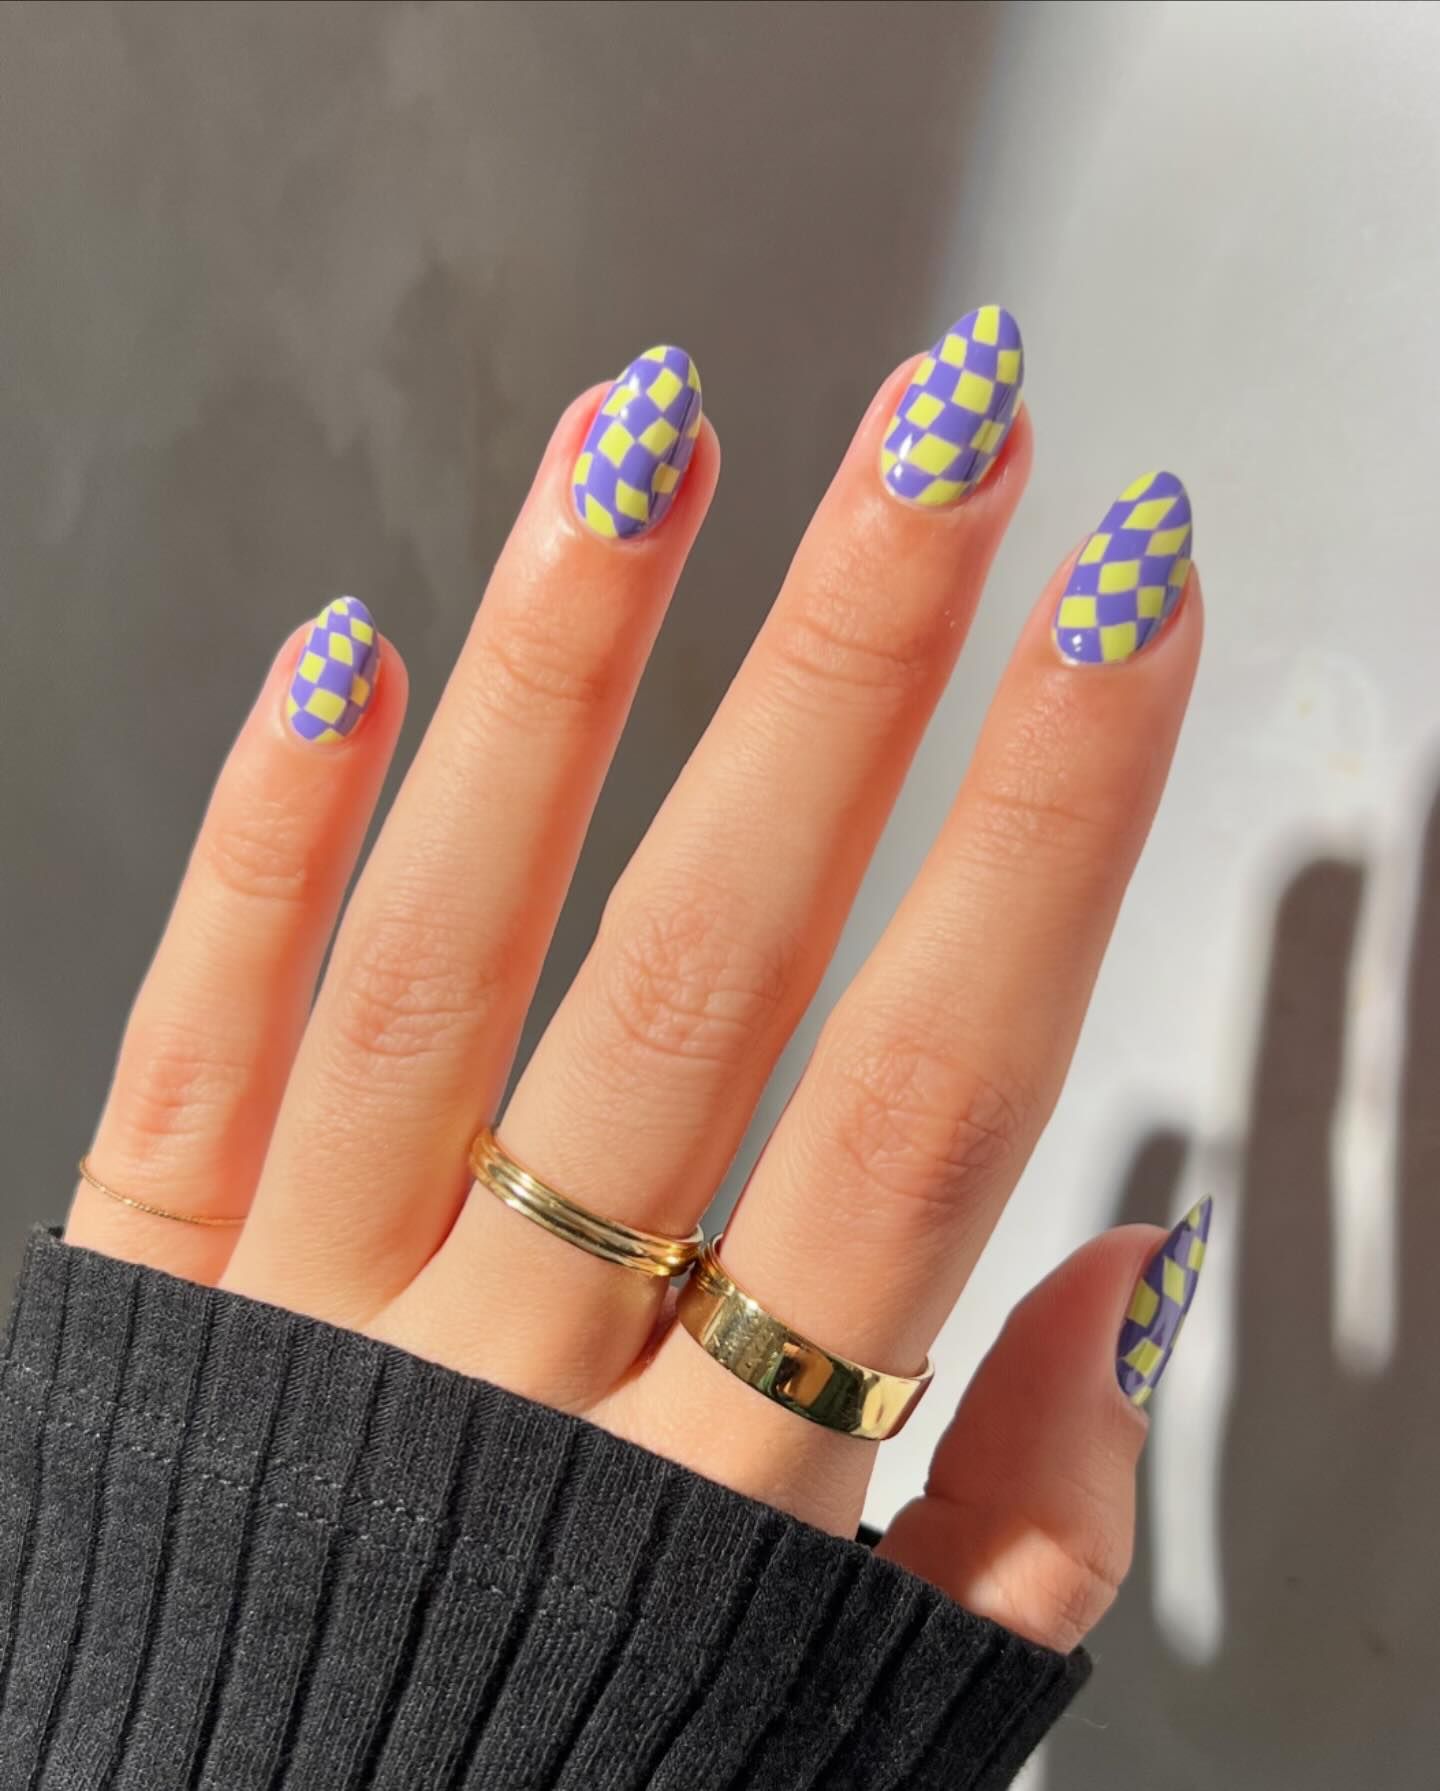 100+ Short Nail Designs You’ll Want To Try This Year images 98